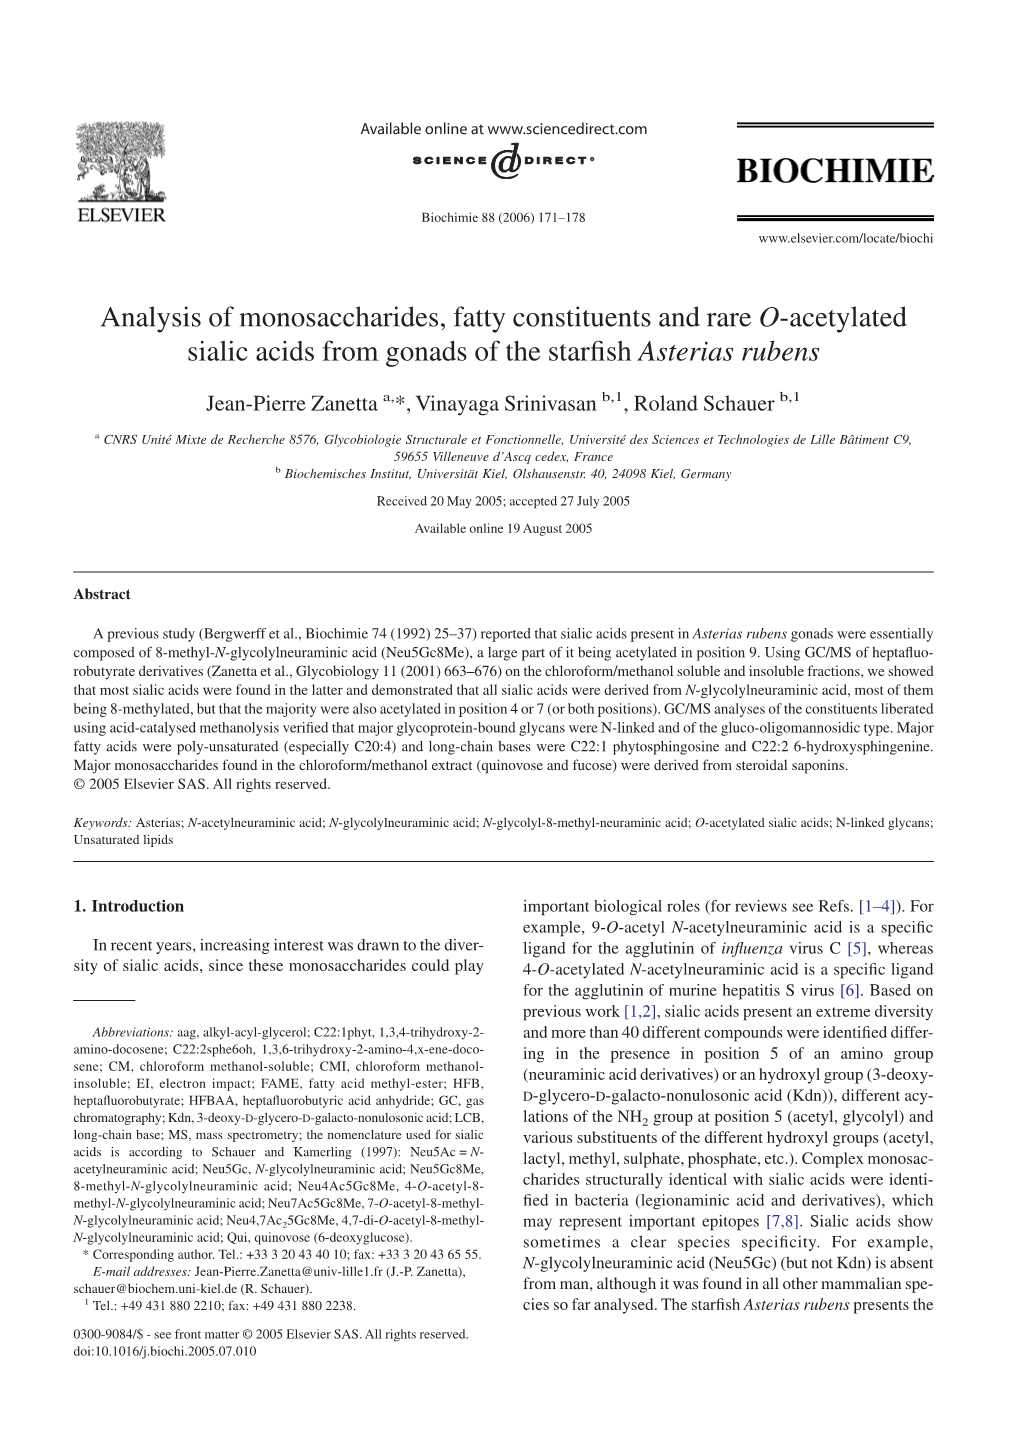 Analysis of Monosaccharides, Fatty Constituents and Rare O-Acetylated Sialic Acids from Gonads of the Starﬁsh Asterias Rubens